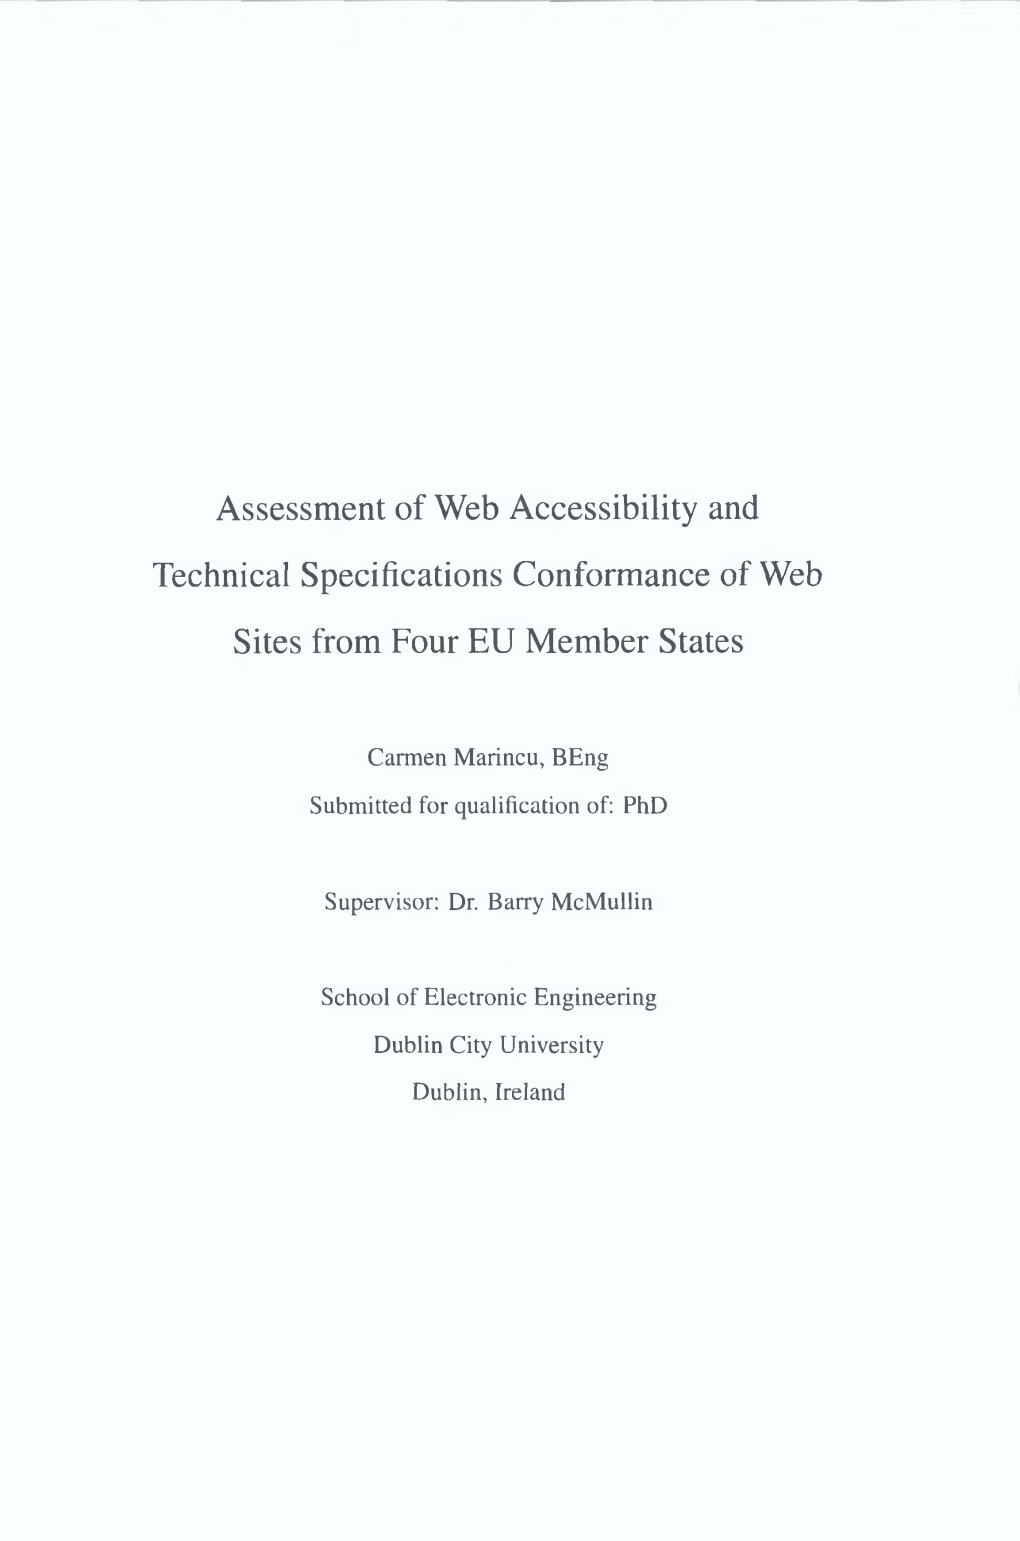 Assessment of Web Accessibility and Technical Specifications Conformance of Web Sites from Four EU Member States